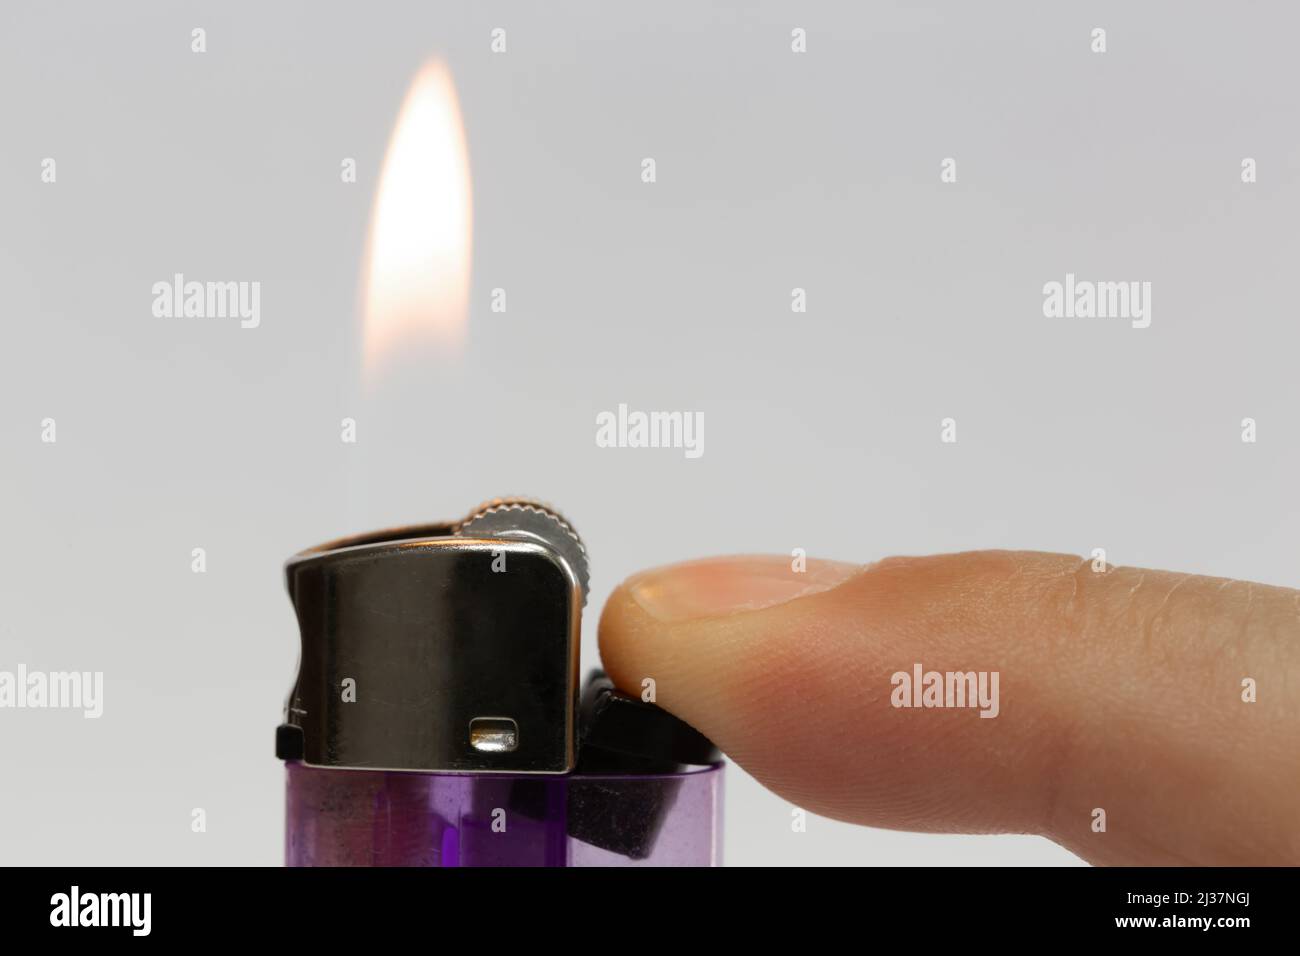 Close-up lighter burn isolated on white background. Transparent purple plastic gas chamber lighter lit by a finger. Stock Photo